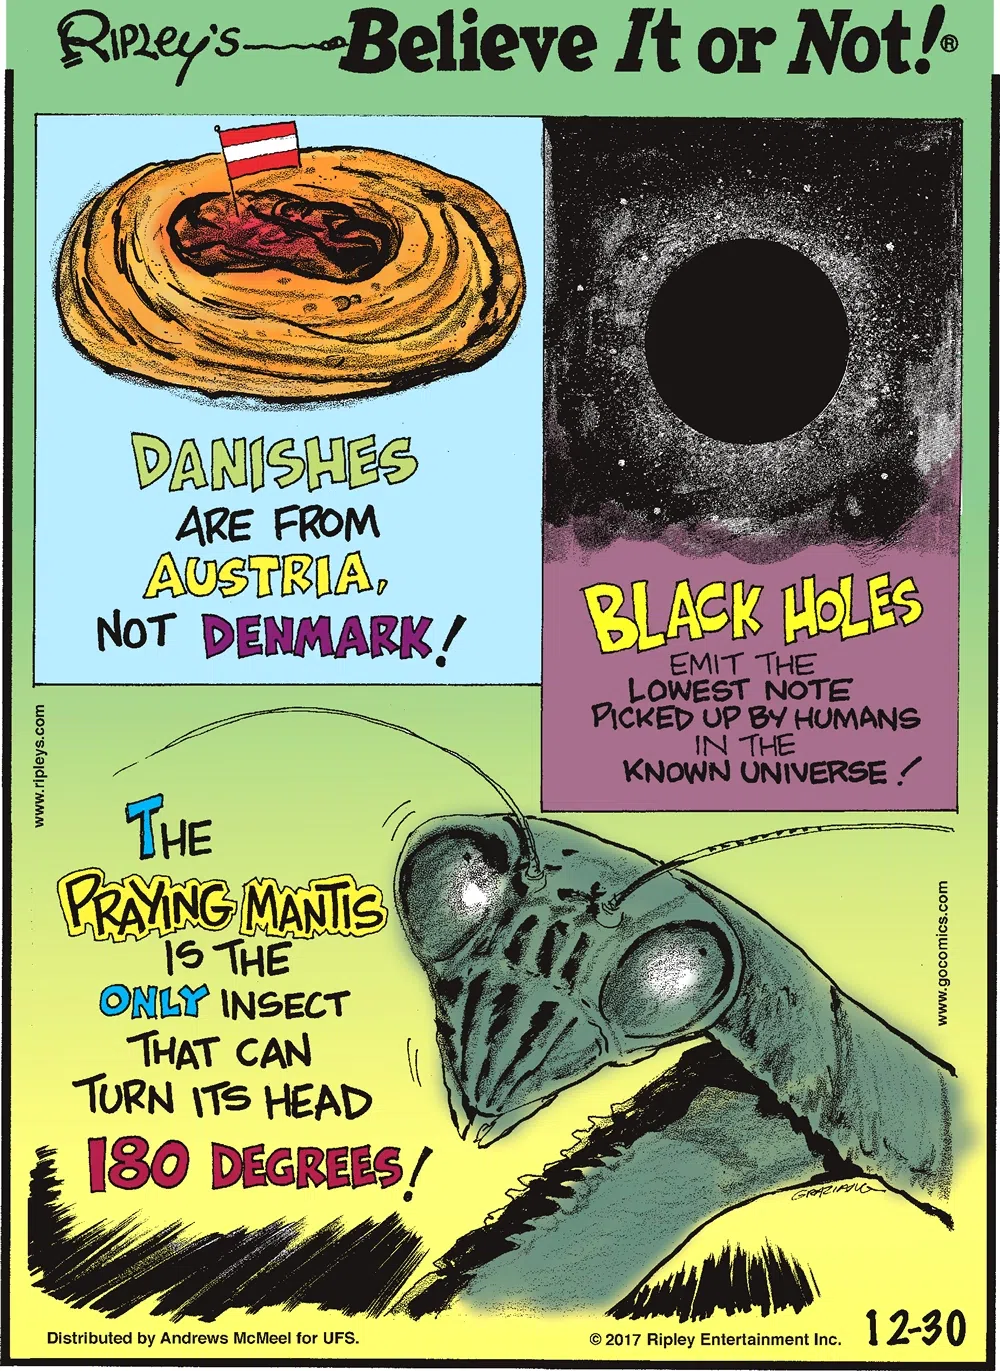 Danishes are from Austria, not Denmark!-------------------- Black holes emit the lowest note picked up by humans in the known universe!-------------------- The praying mantis is the only insect that can turn its head 180 degrees!